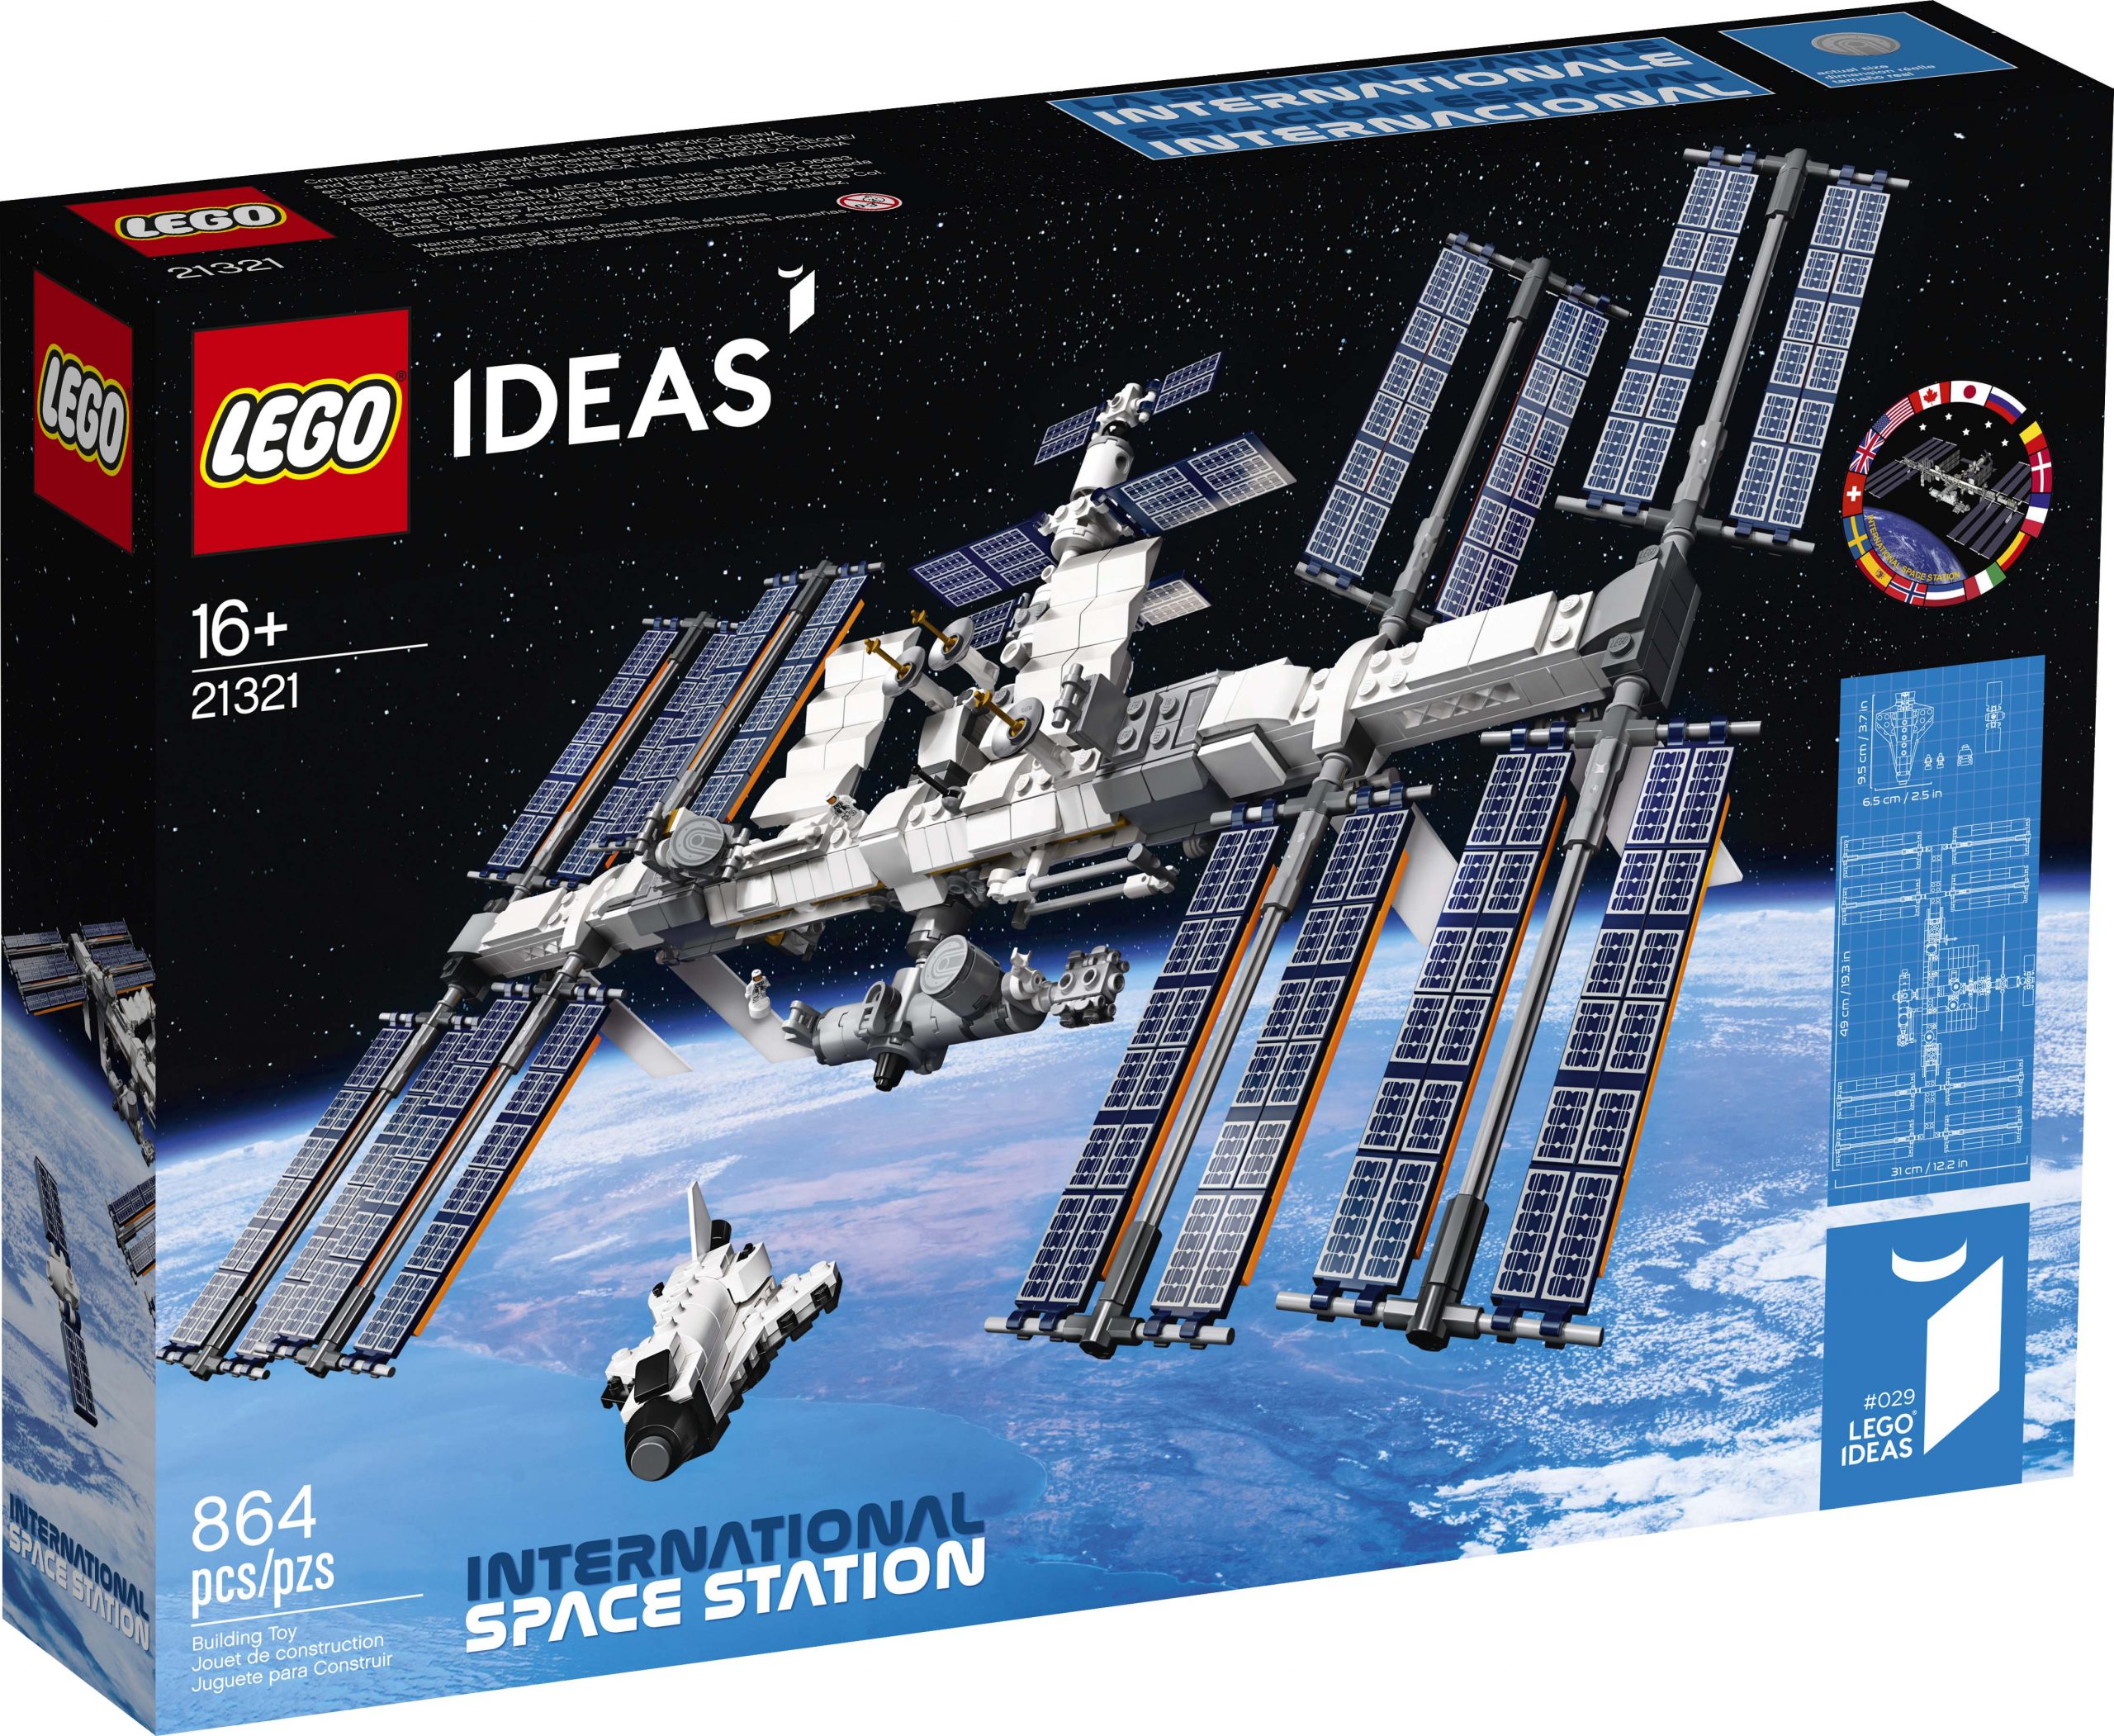 LEGO Ideas International Space Station (21321) Officially Announced